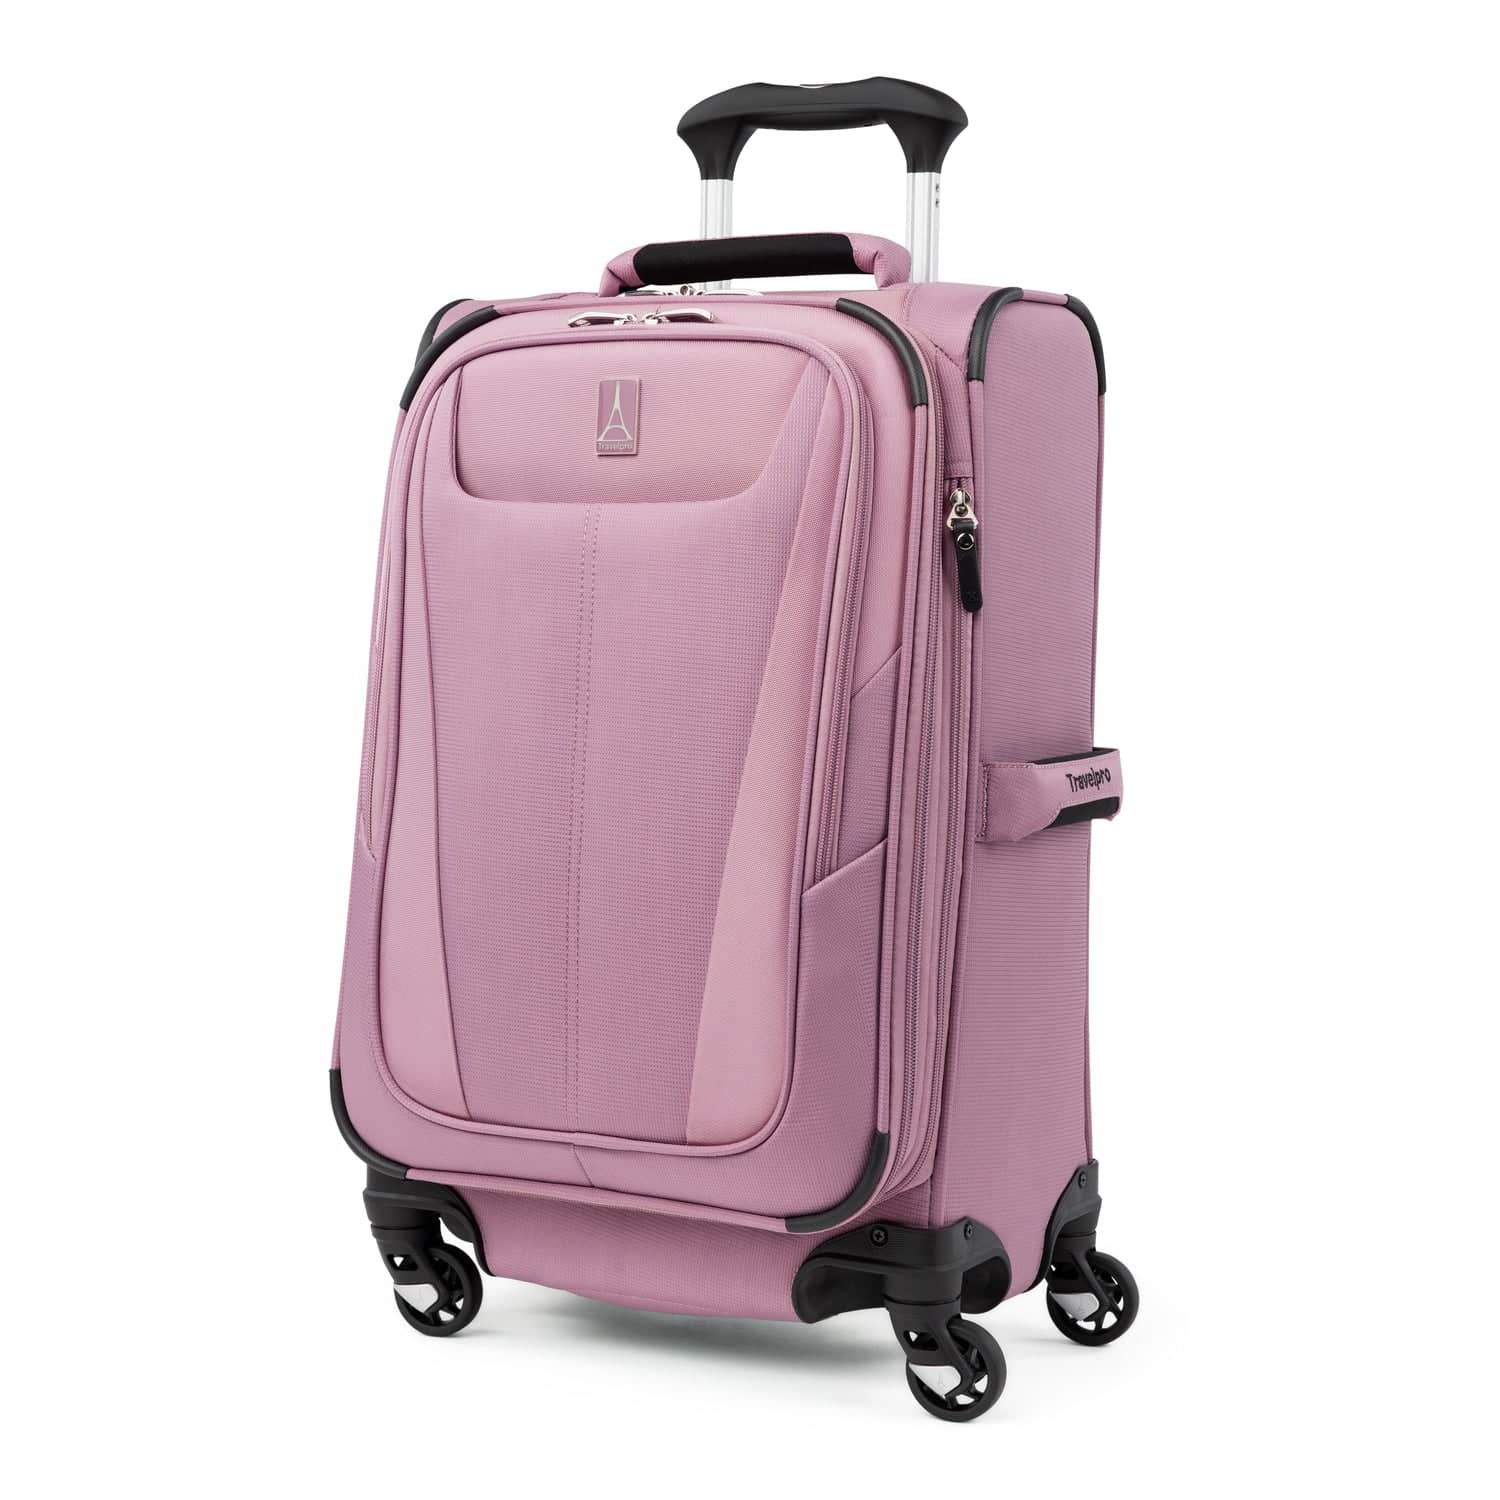 Source Pink women boarding box 360 degree trolley travel suitcase sets abs  luggage bag on m.